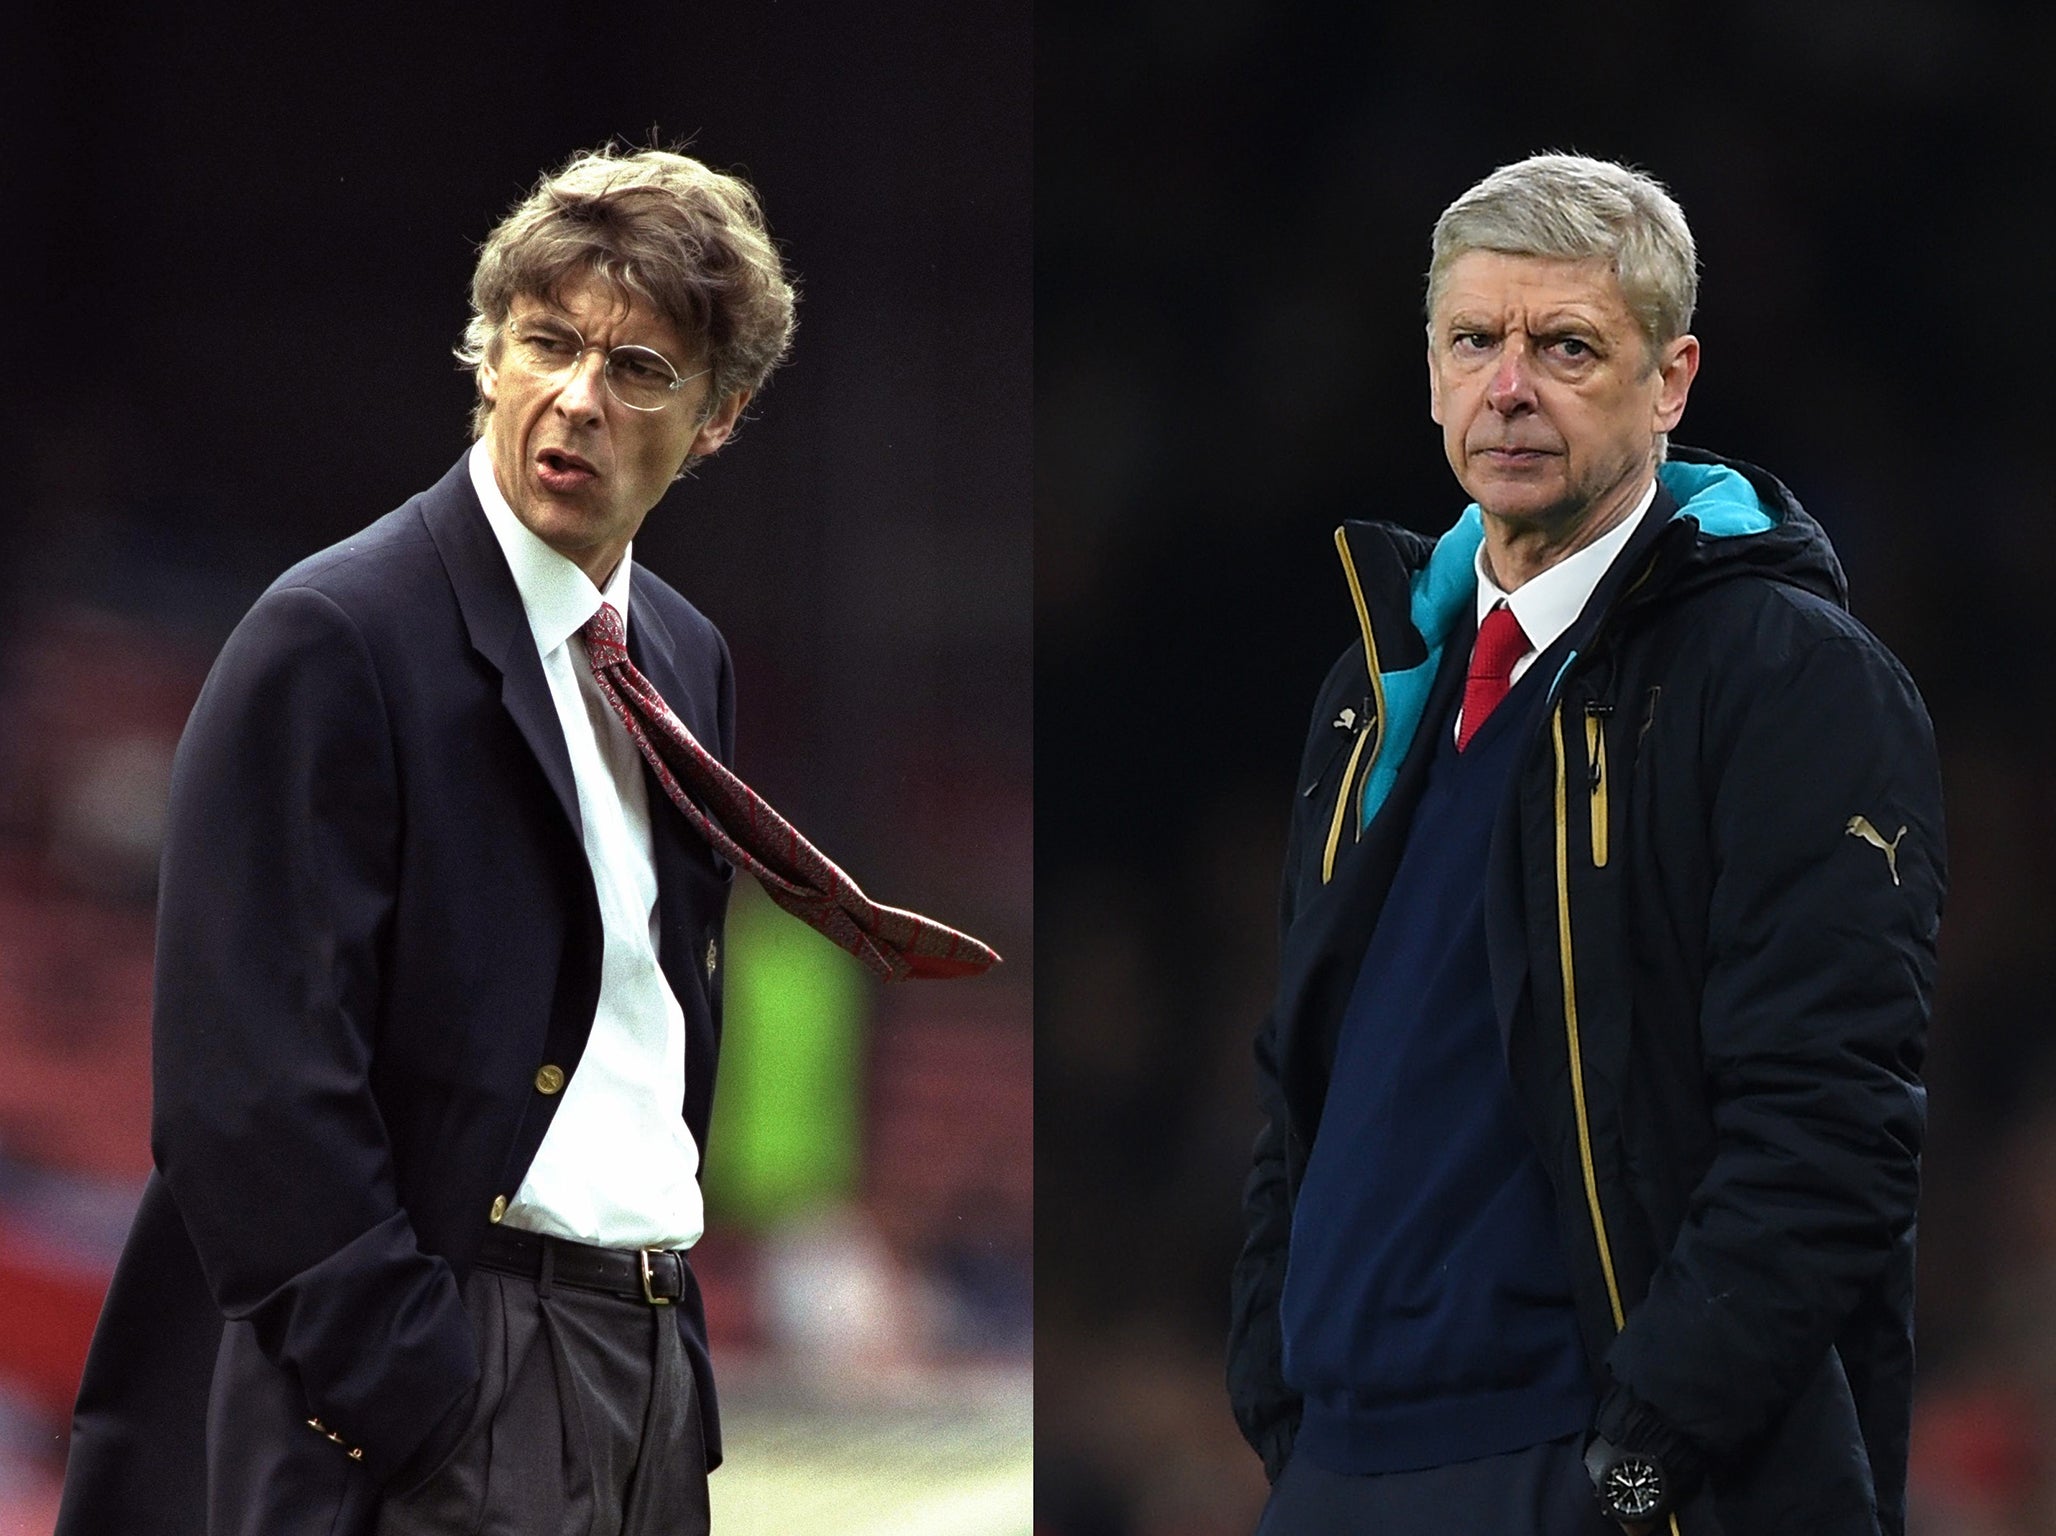 Arsene Wenger first took charge of Arsenal 21-years ago